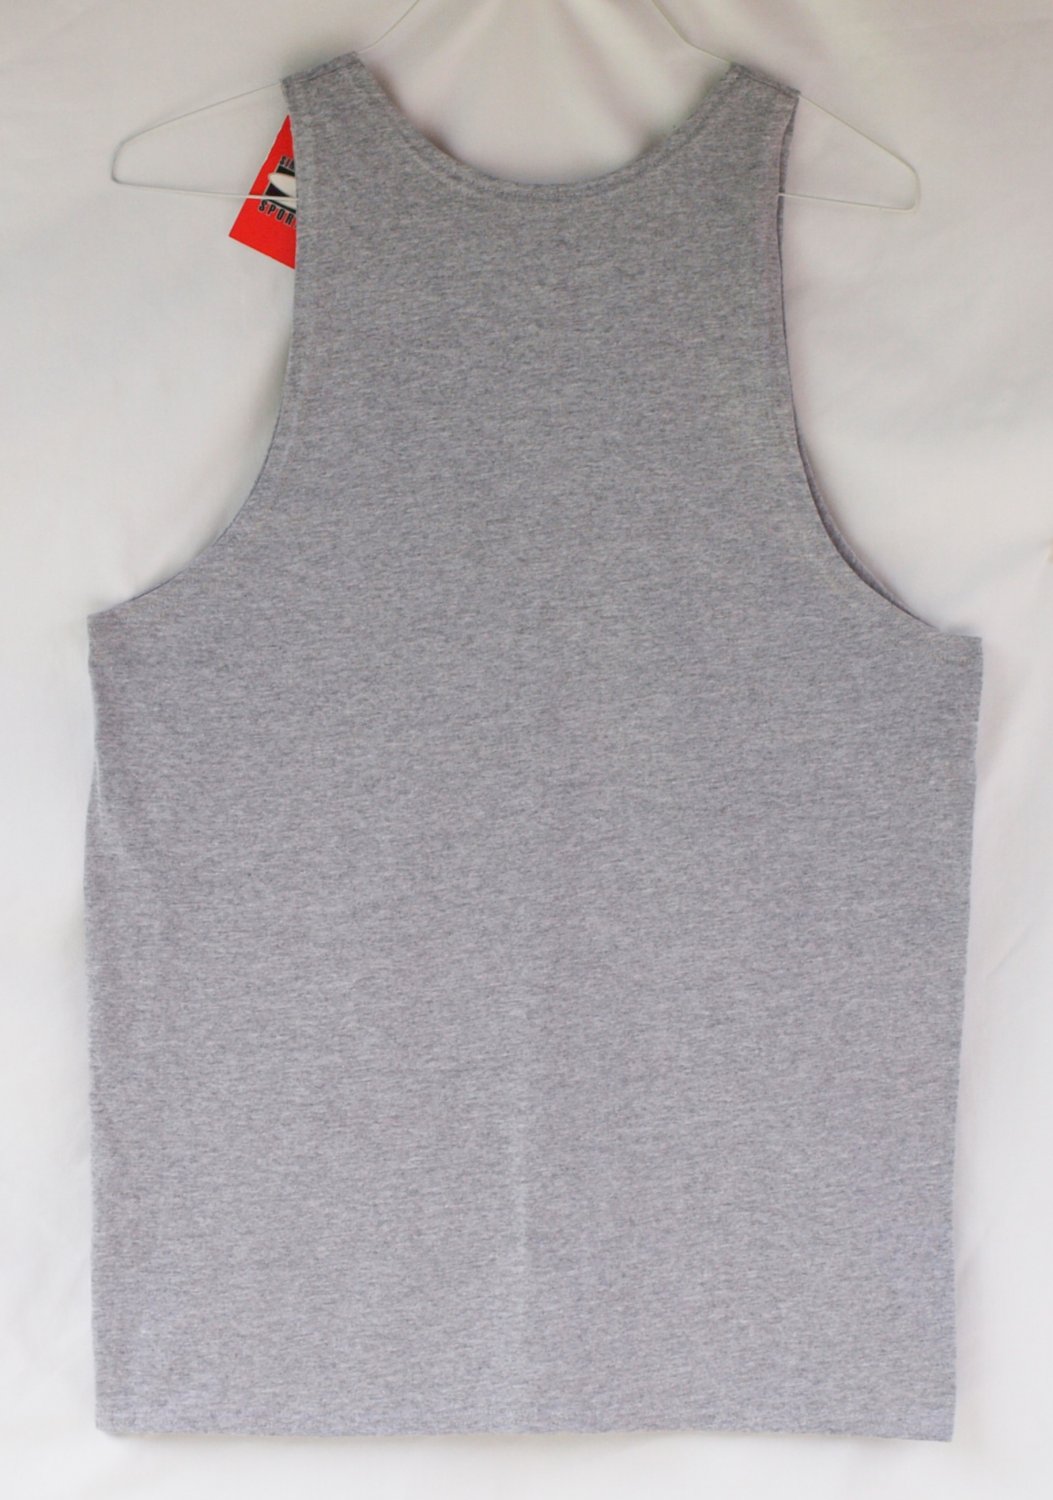 SIMPLY FOR SPORTS Men's Size M Heather Grey Muscle Shirt Tank Top ...